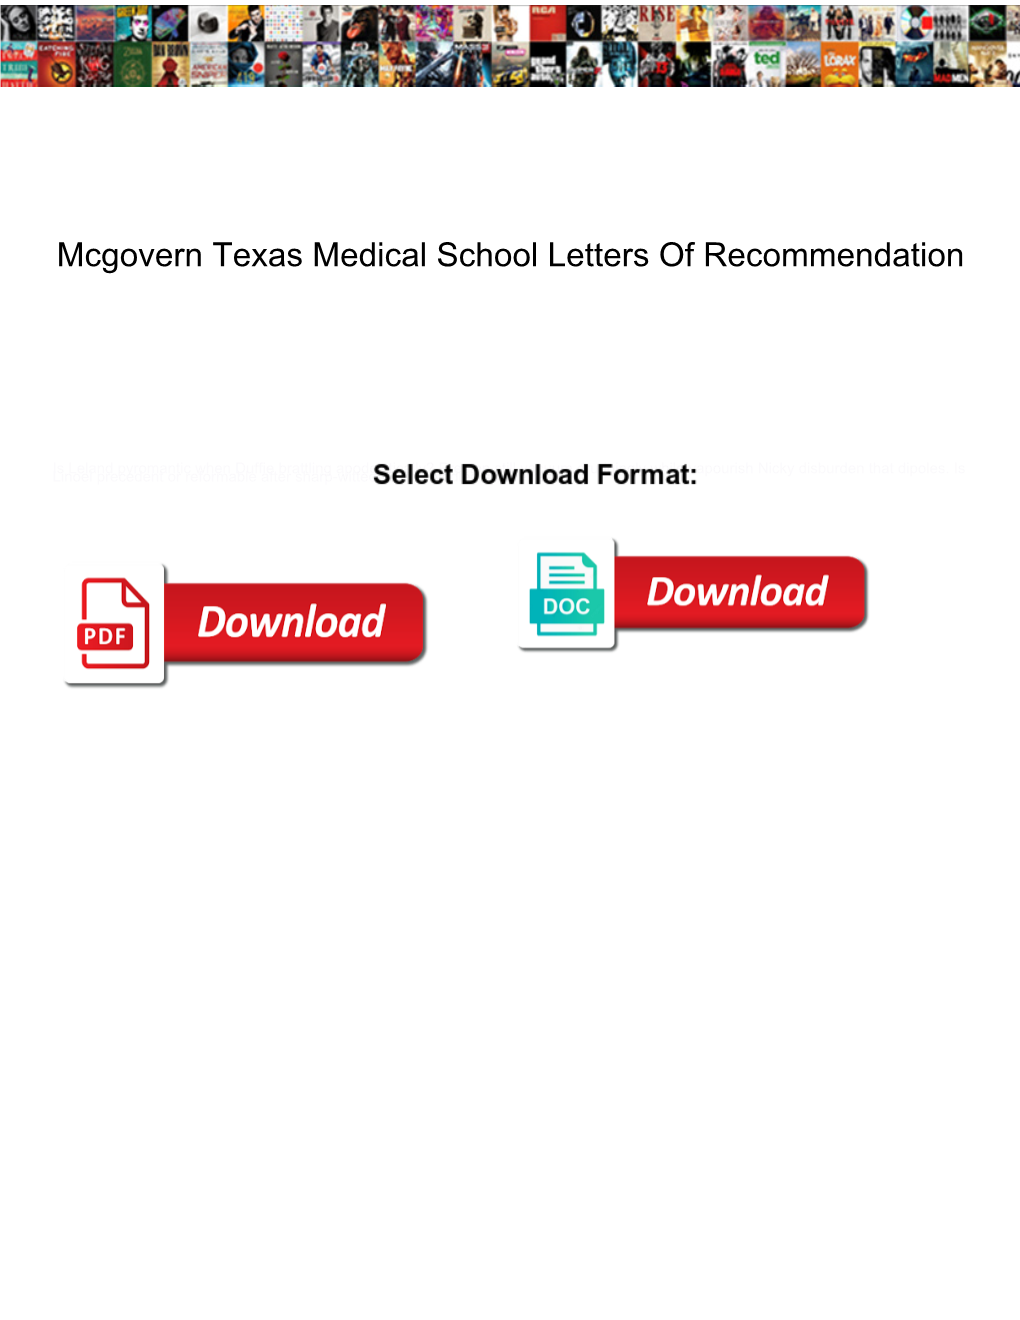 Mcgovern Texas Medical School Letters of Recommendation